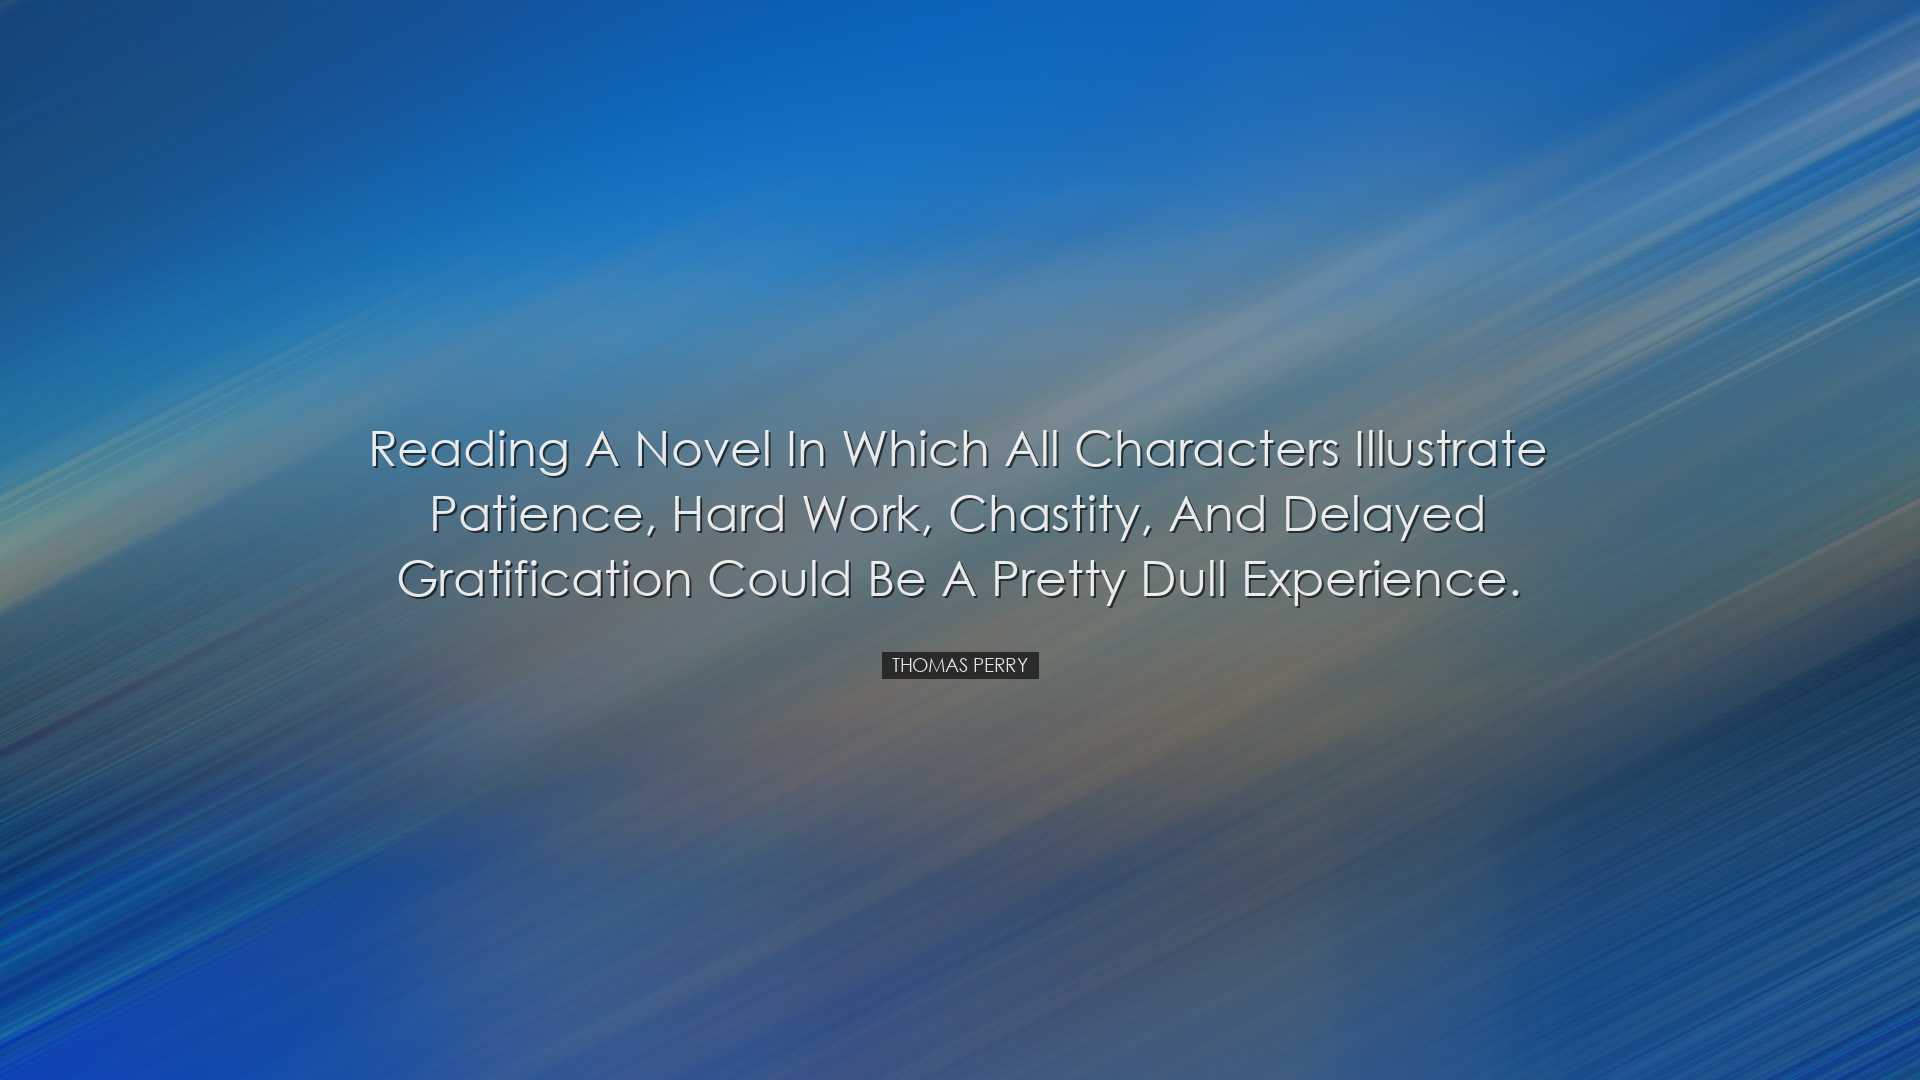 Reading a novel in which all characters illustrate patience, hard